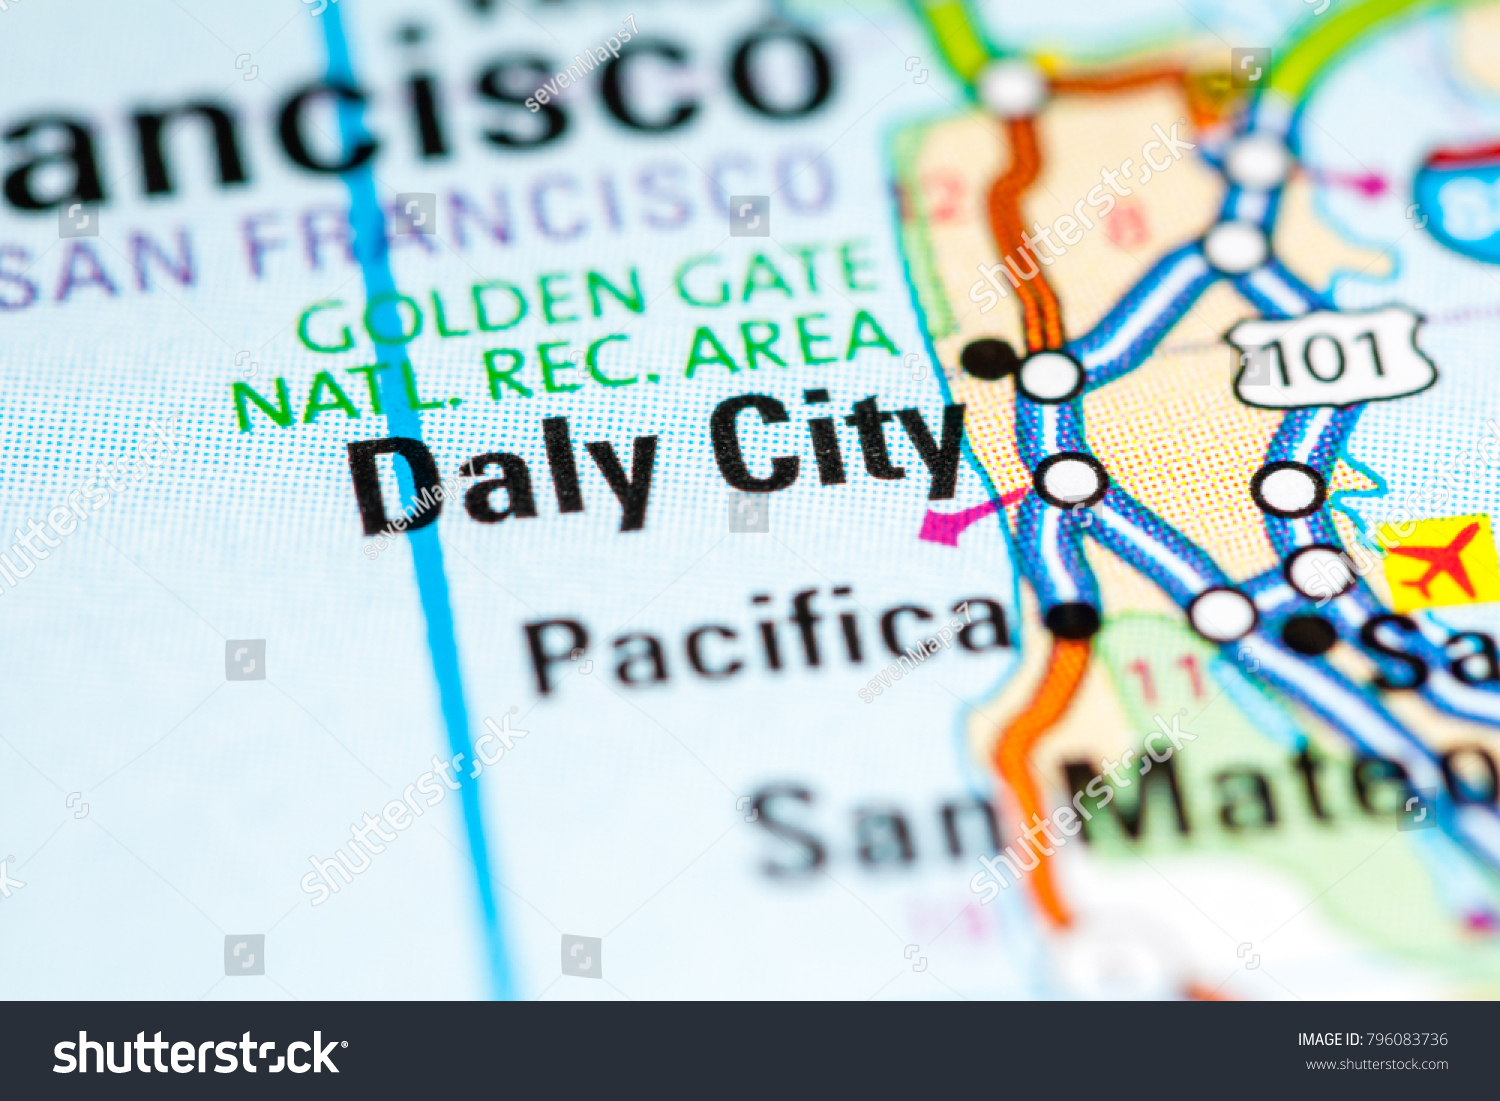 Daly City California Usa On Map Stock Photo Edit Now 796083736